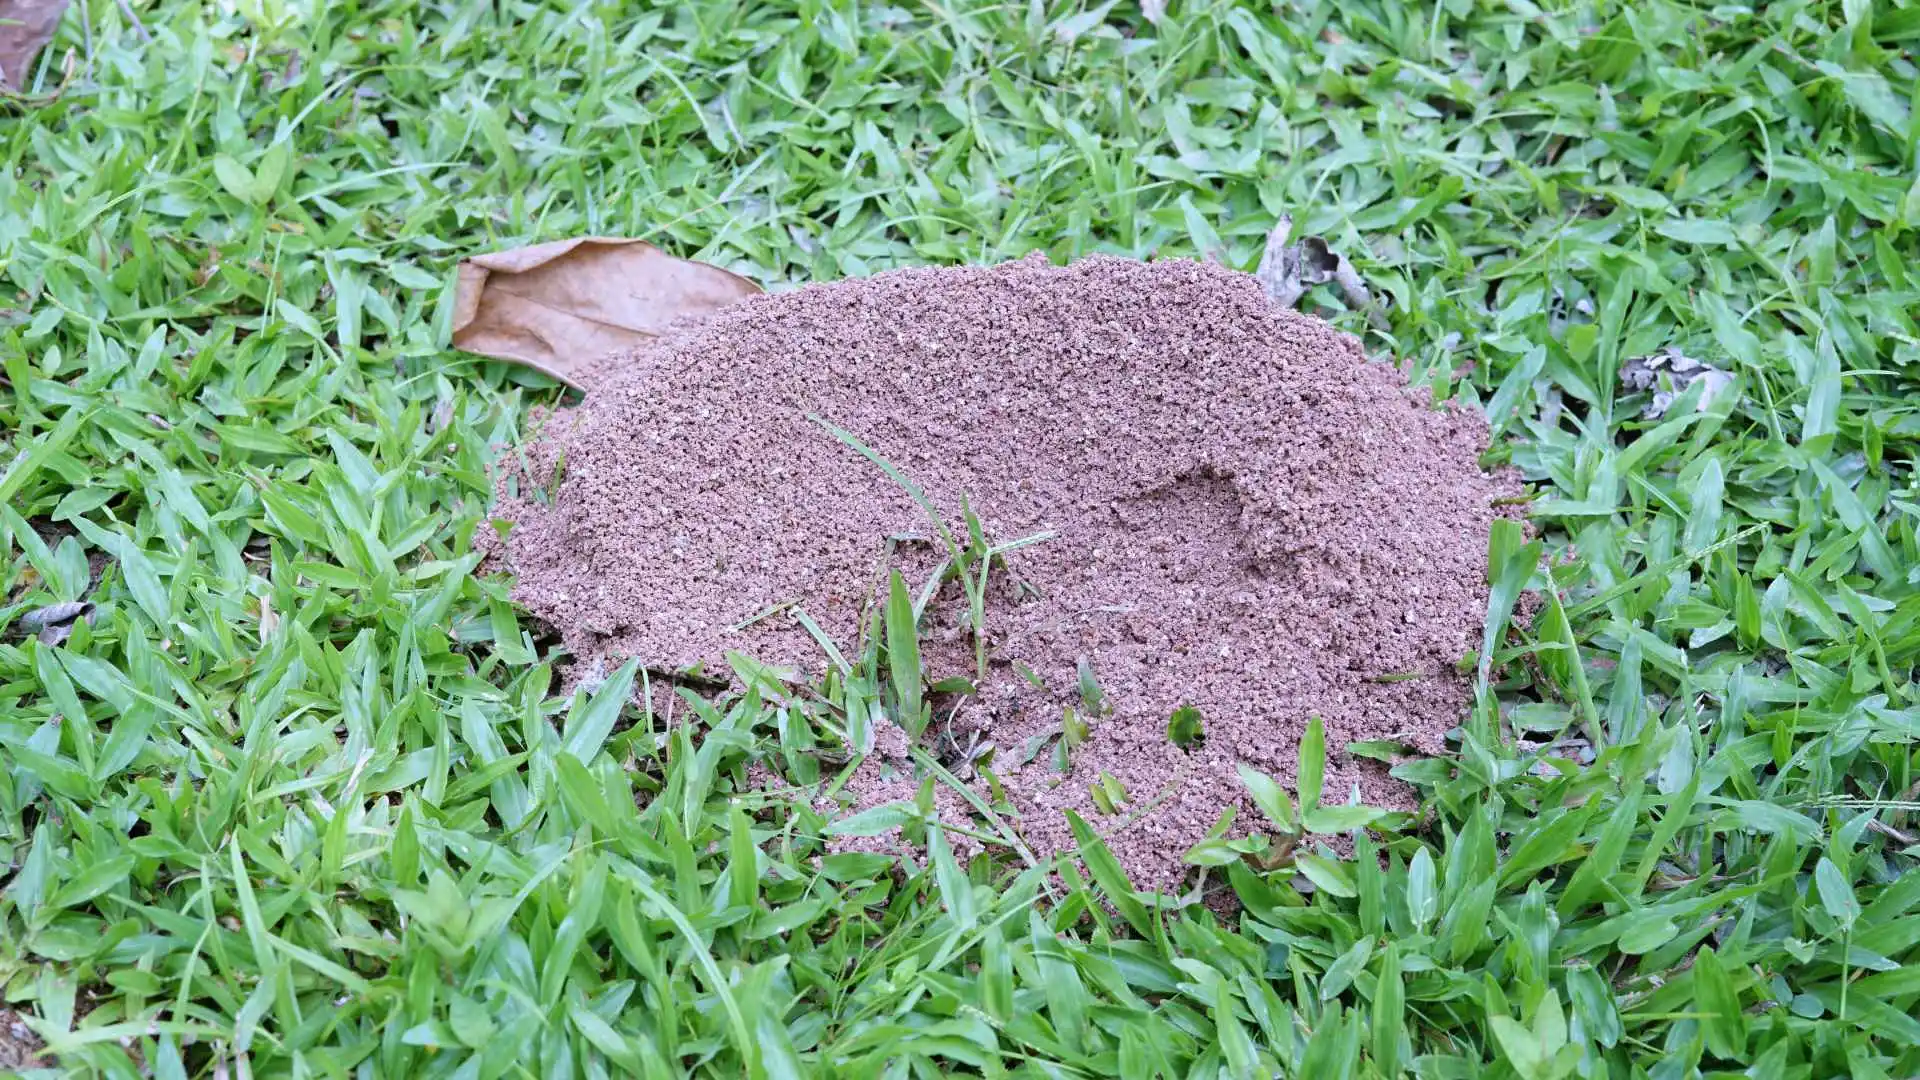 Ant hill found in client's lawn in Kansas City, KS.